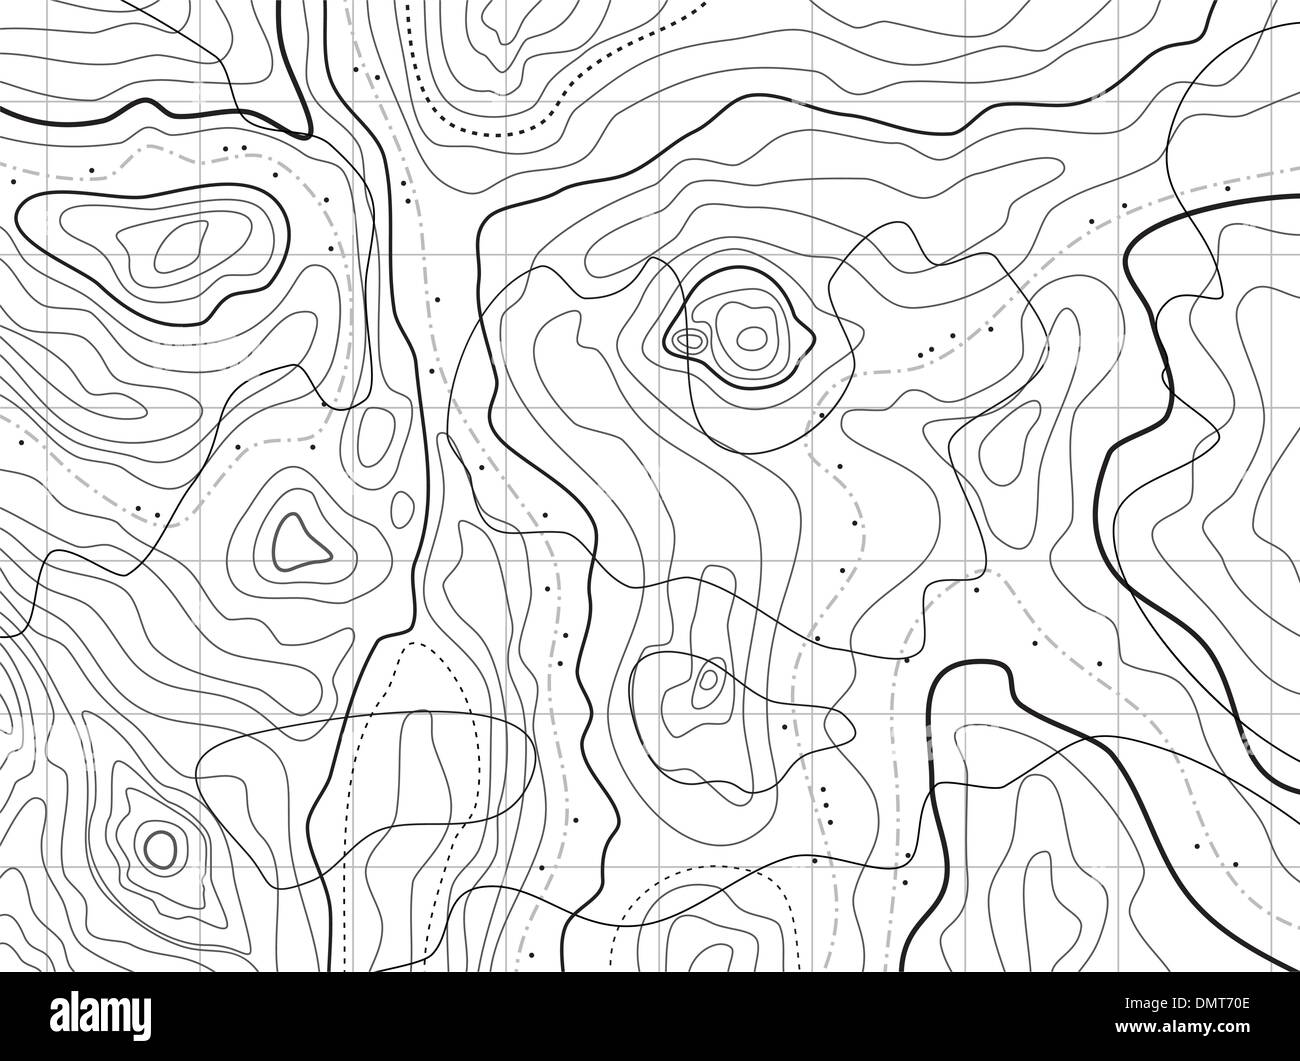 abstract topographical map with no names Stock Vector